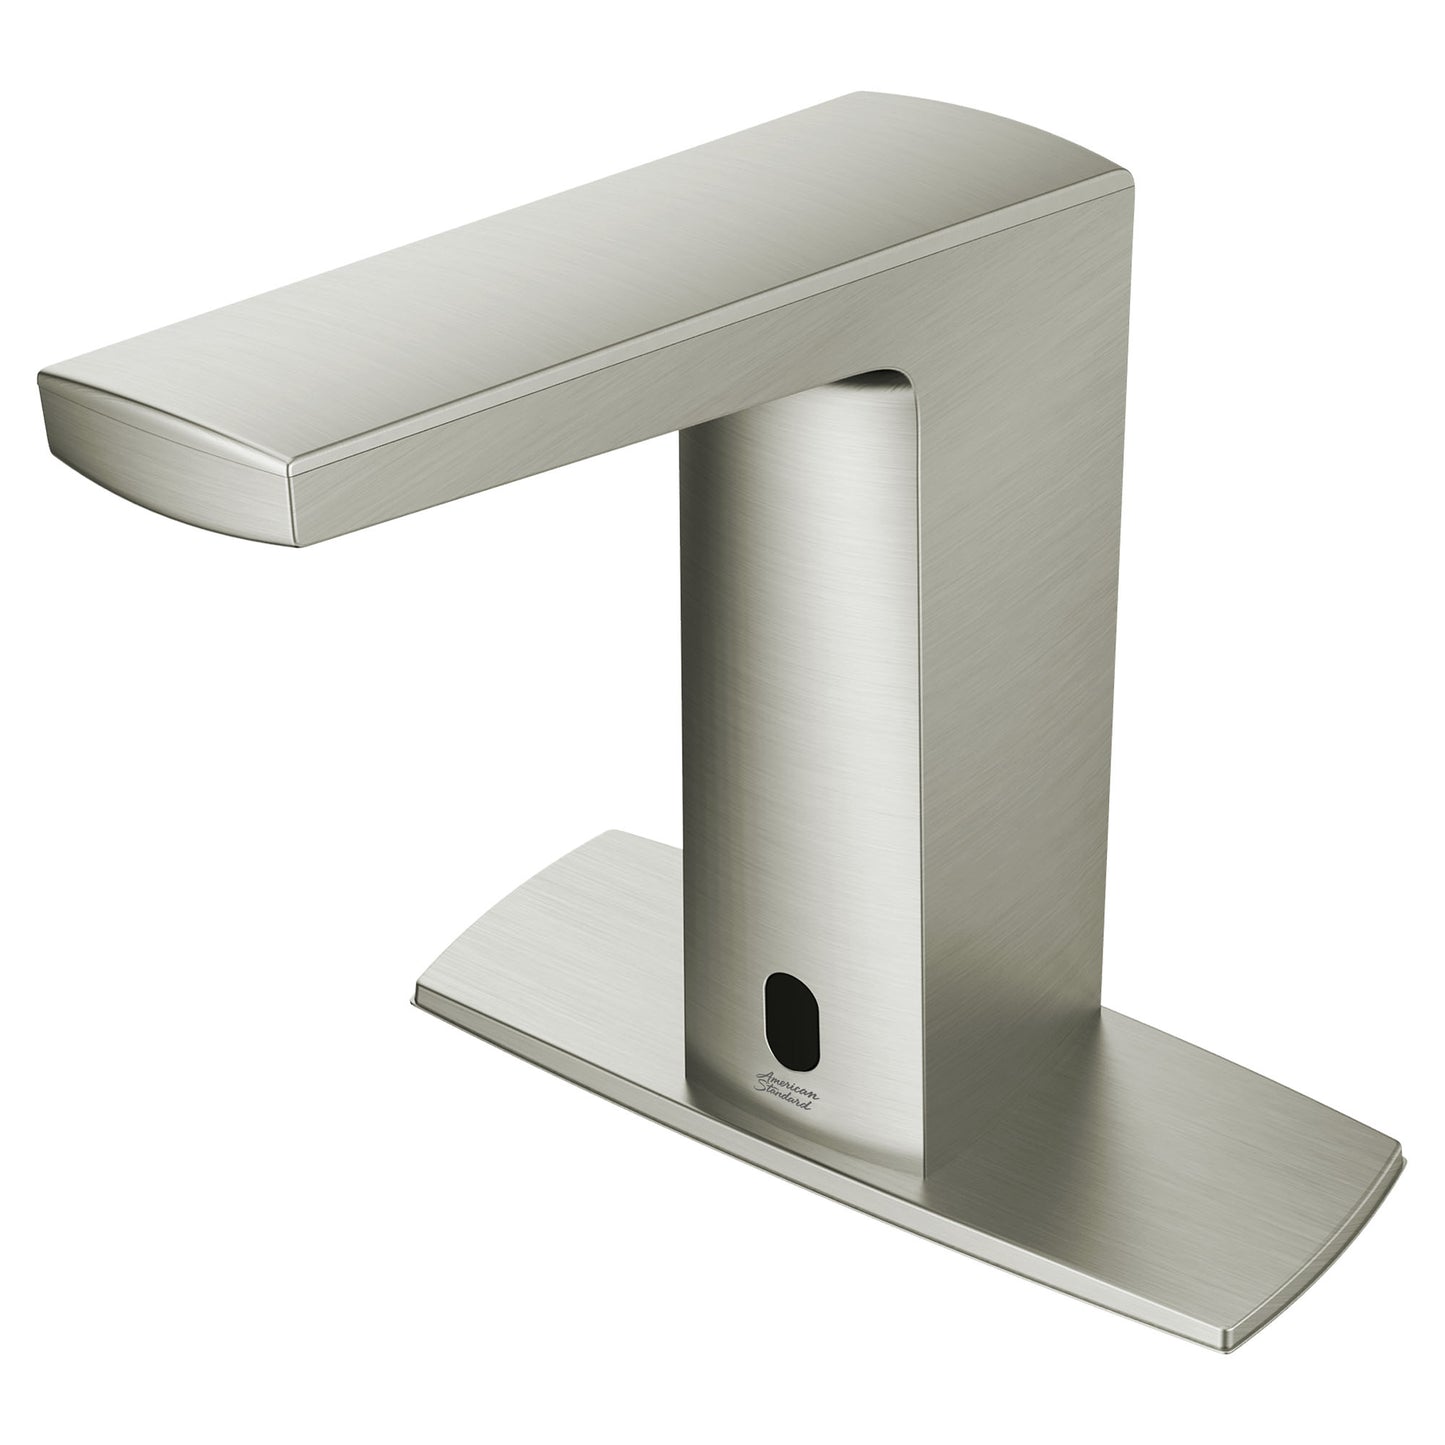 AMERICAN-STANDARD 702B105.295, Paradigm Selectronic Touchless Faucet, Base Model, 0.5 gpm/1.9 Lpm in Brushed Nickel